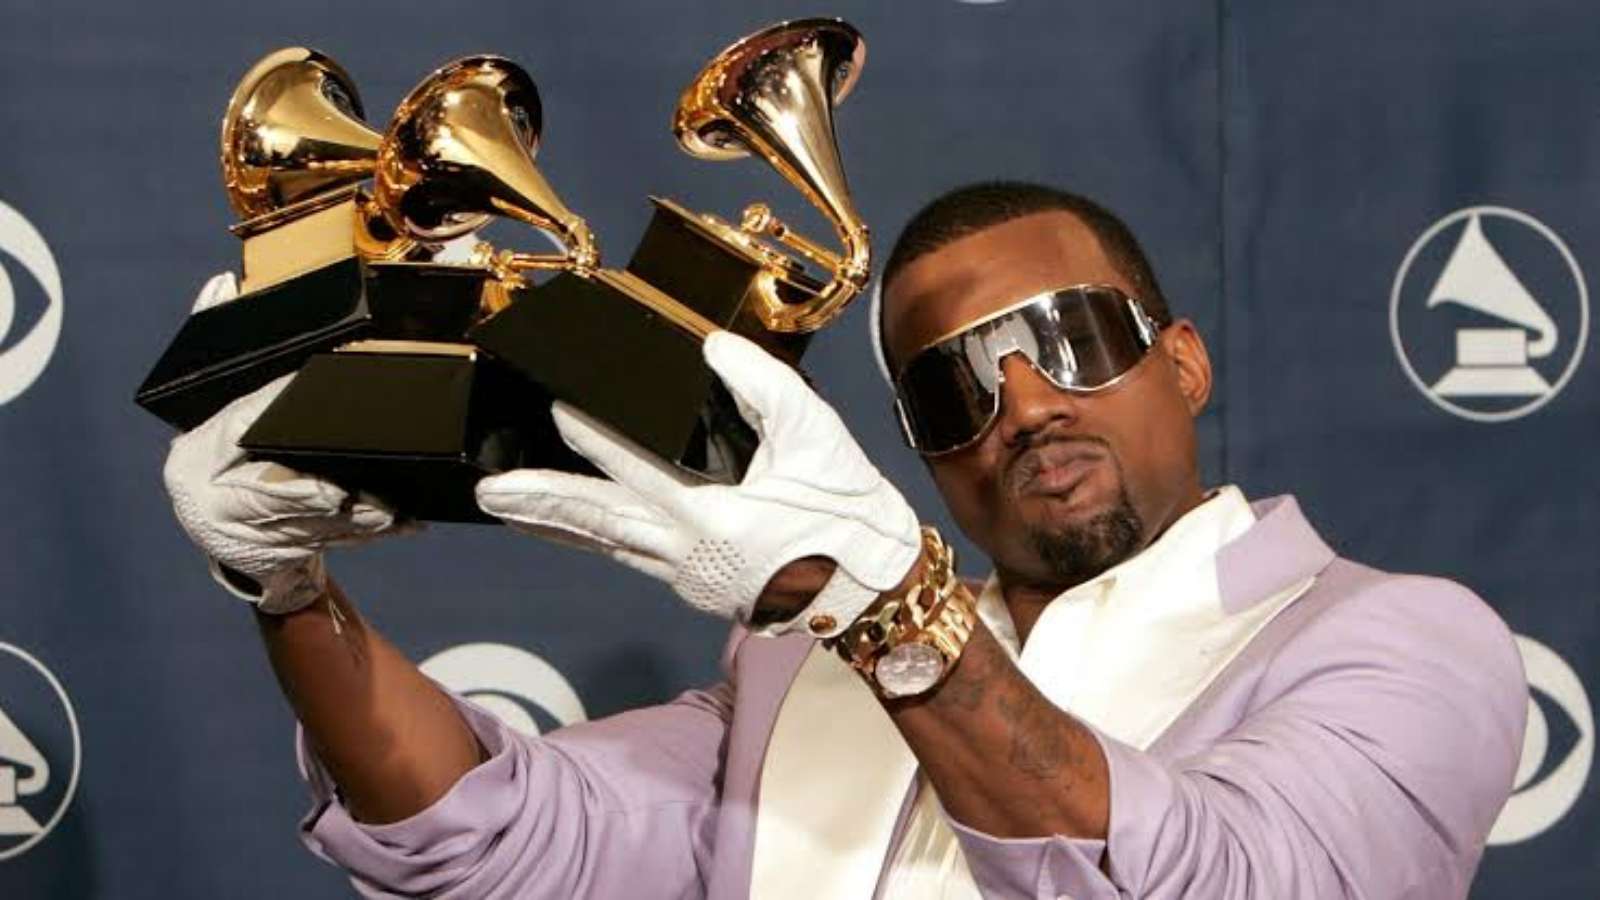 Kanye West with his Grammys